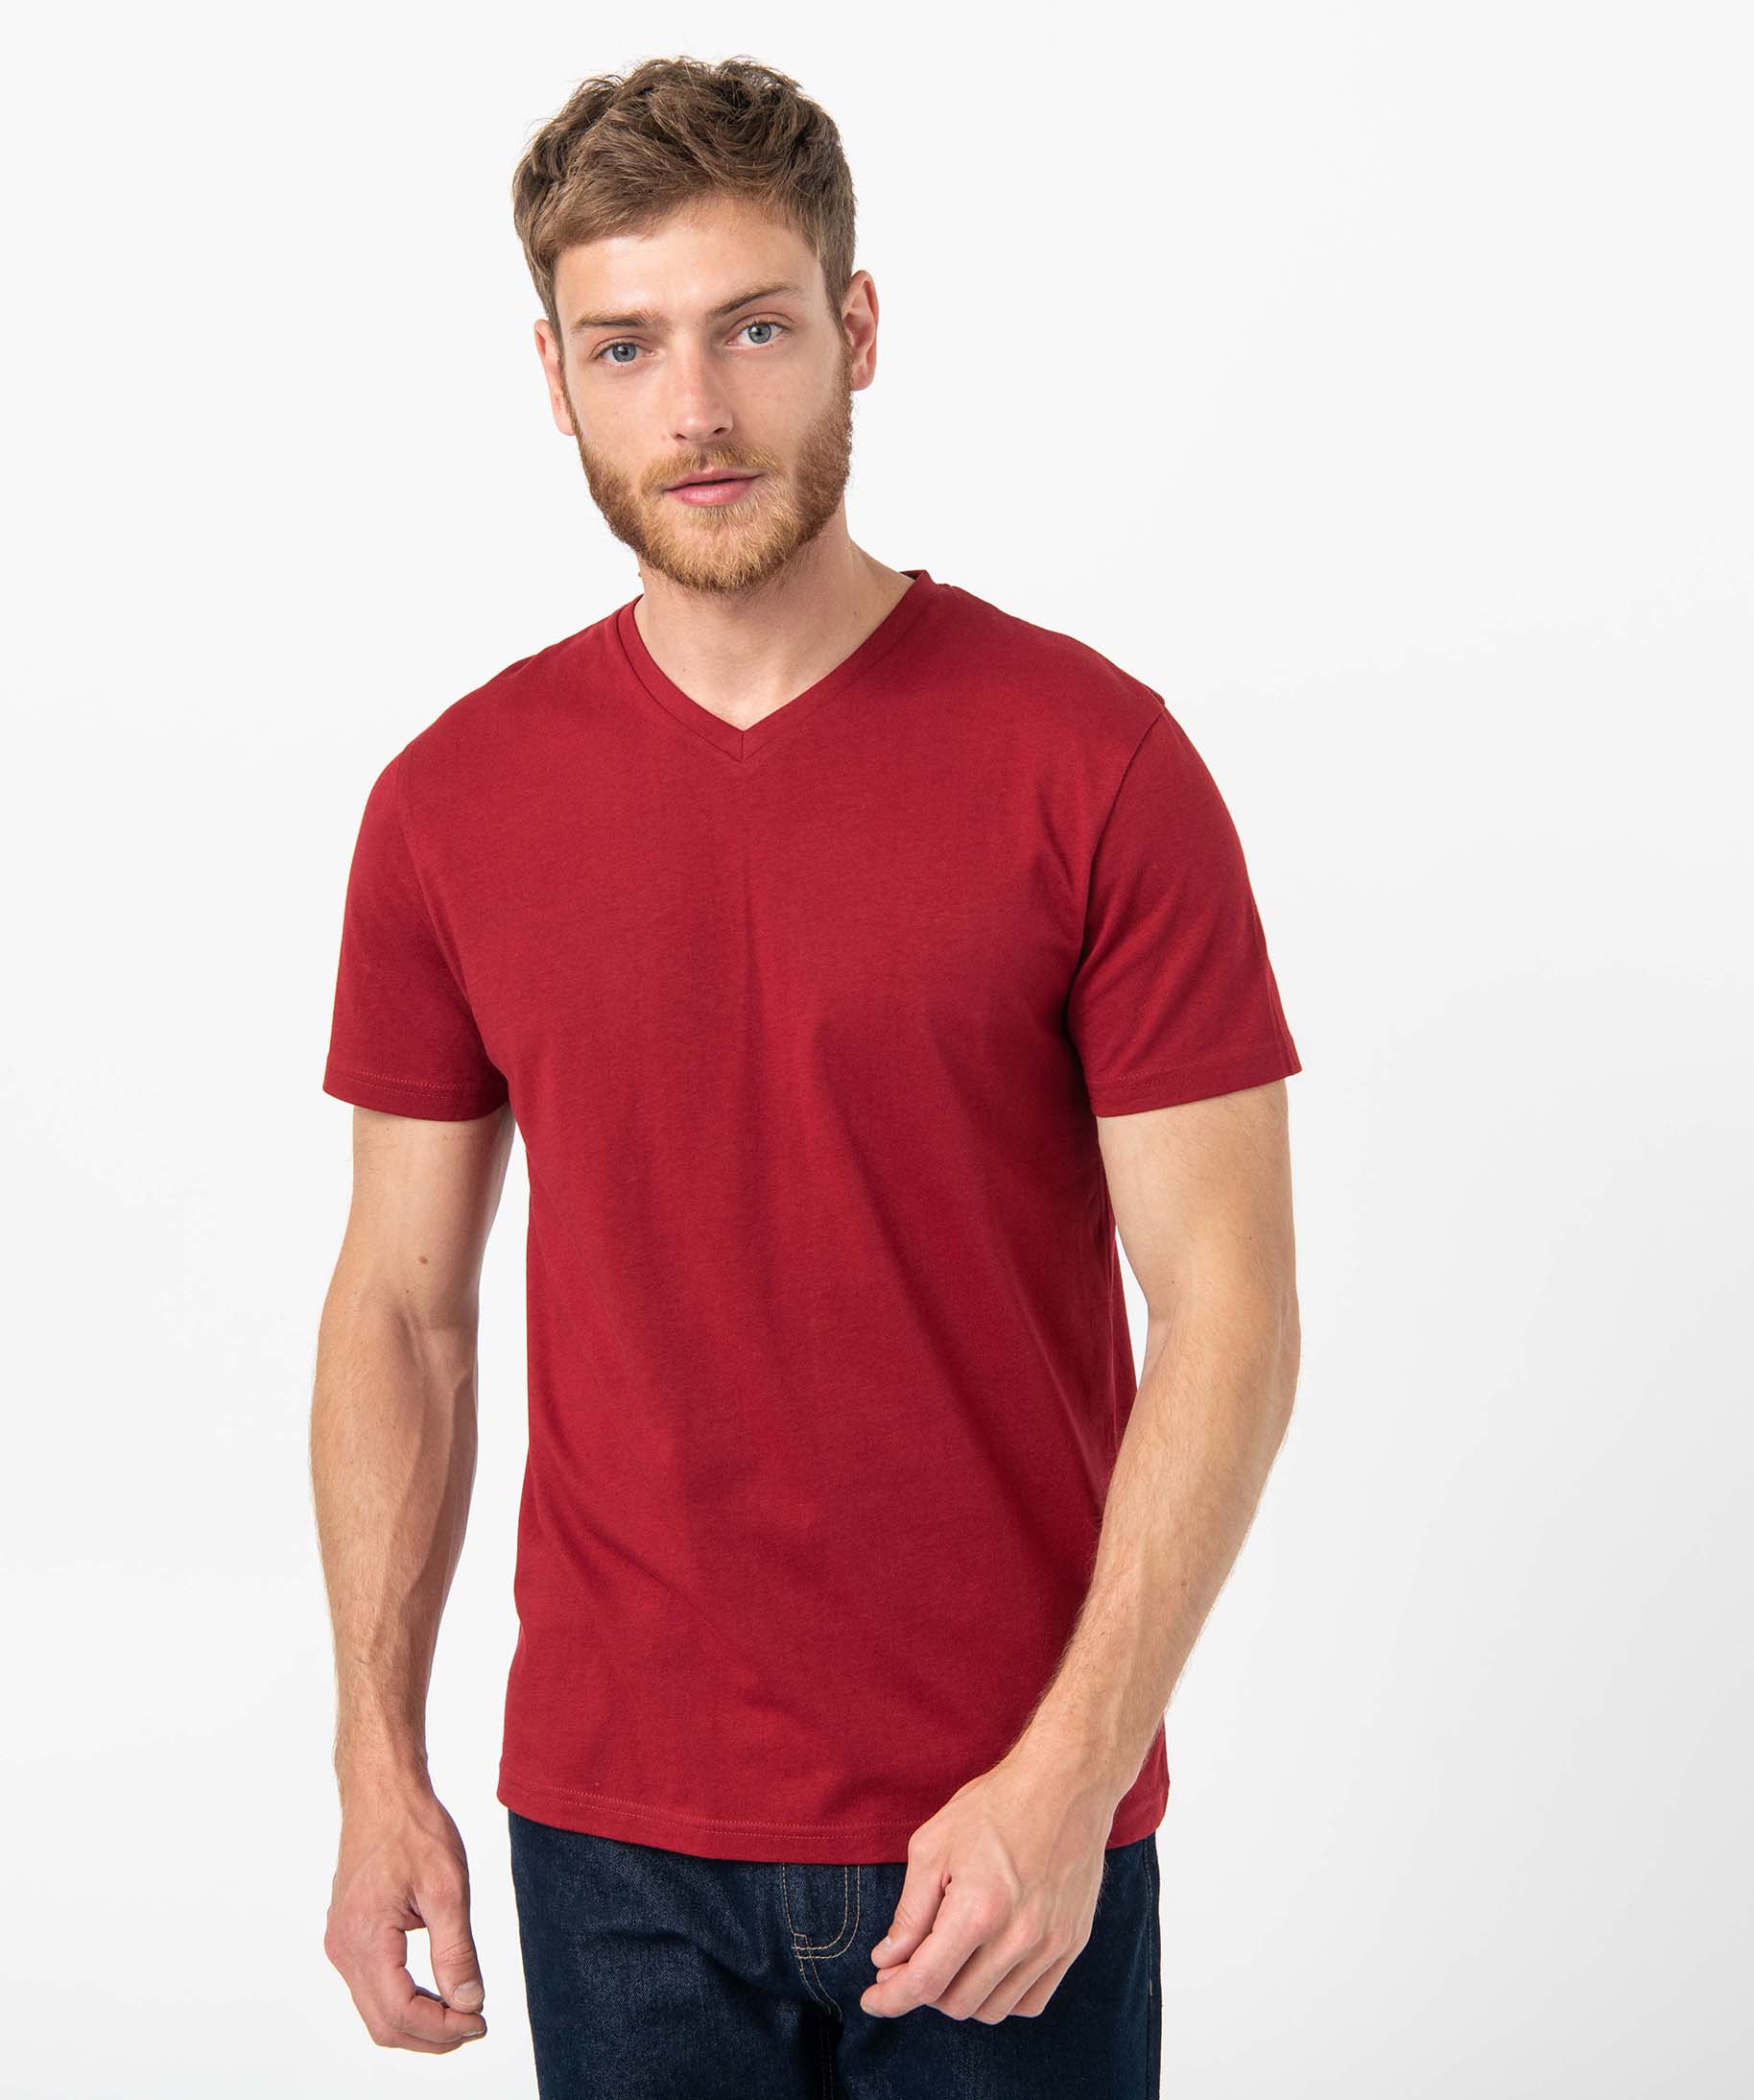 tee-shirt homme a manches courtes et col v rouge tee-shirts